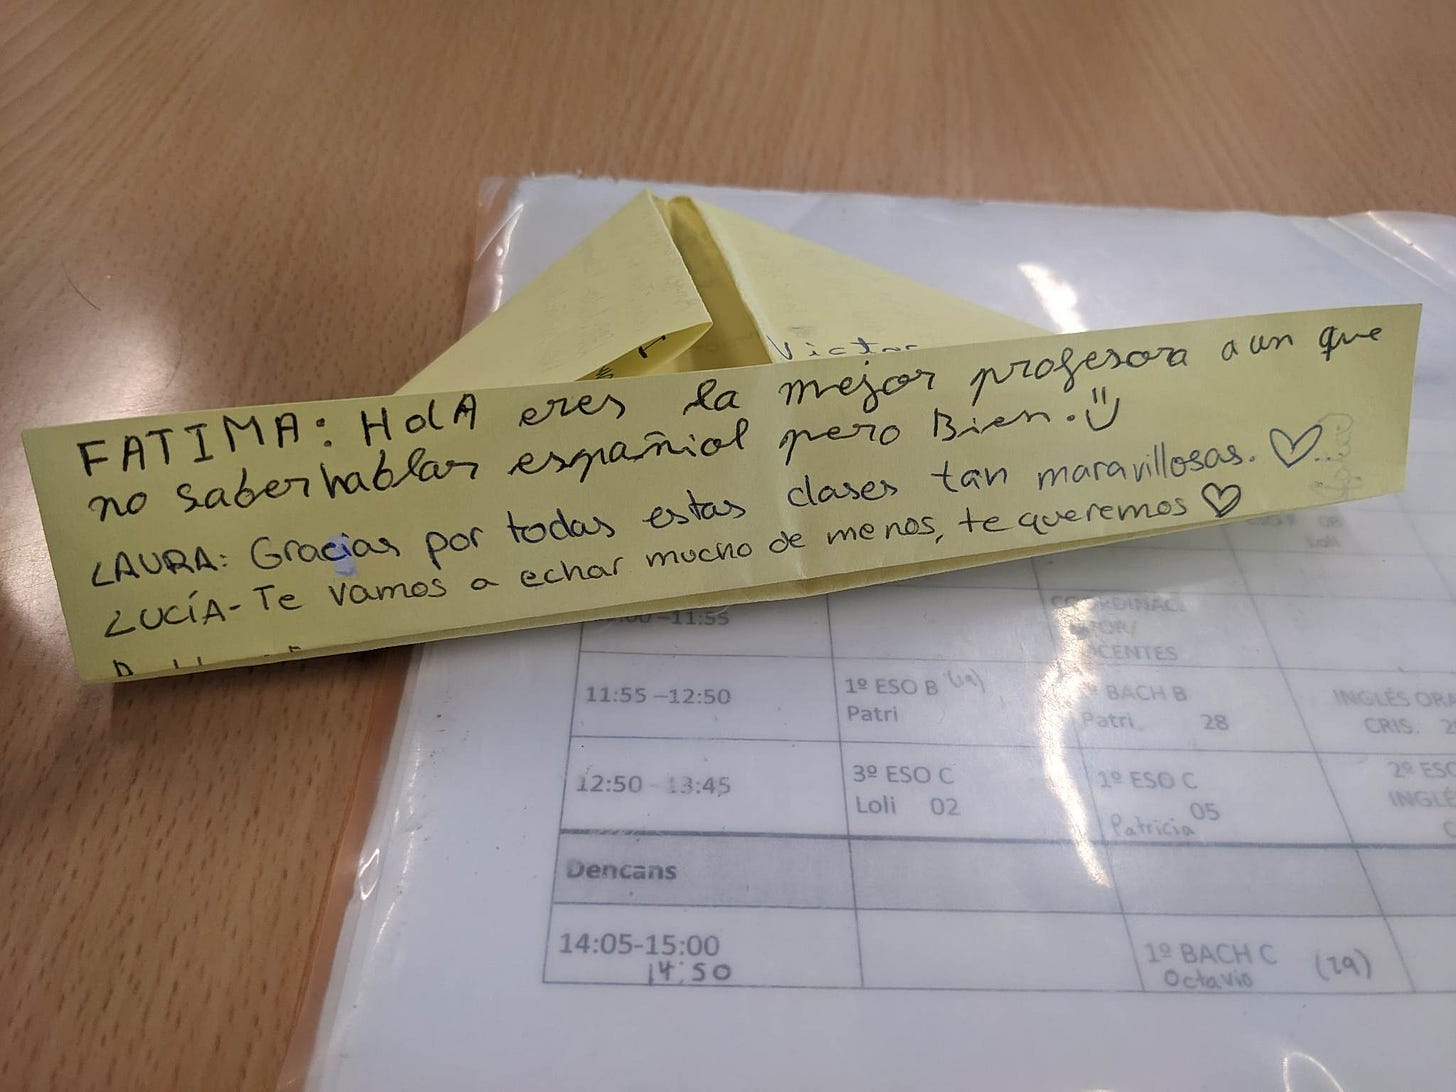 A folded piece of paper with three messages written on it in Spanish.